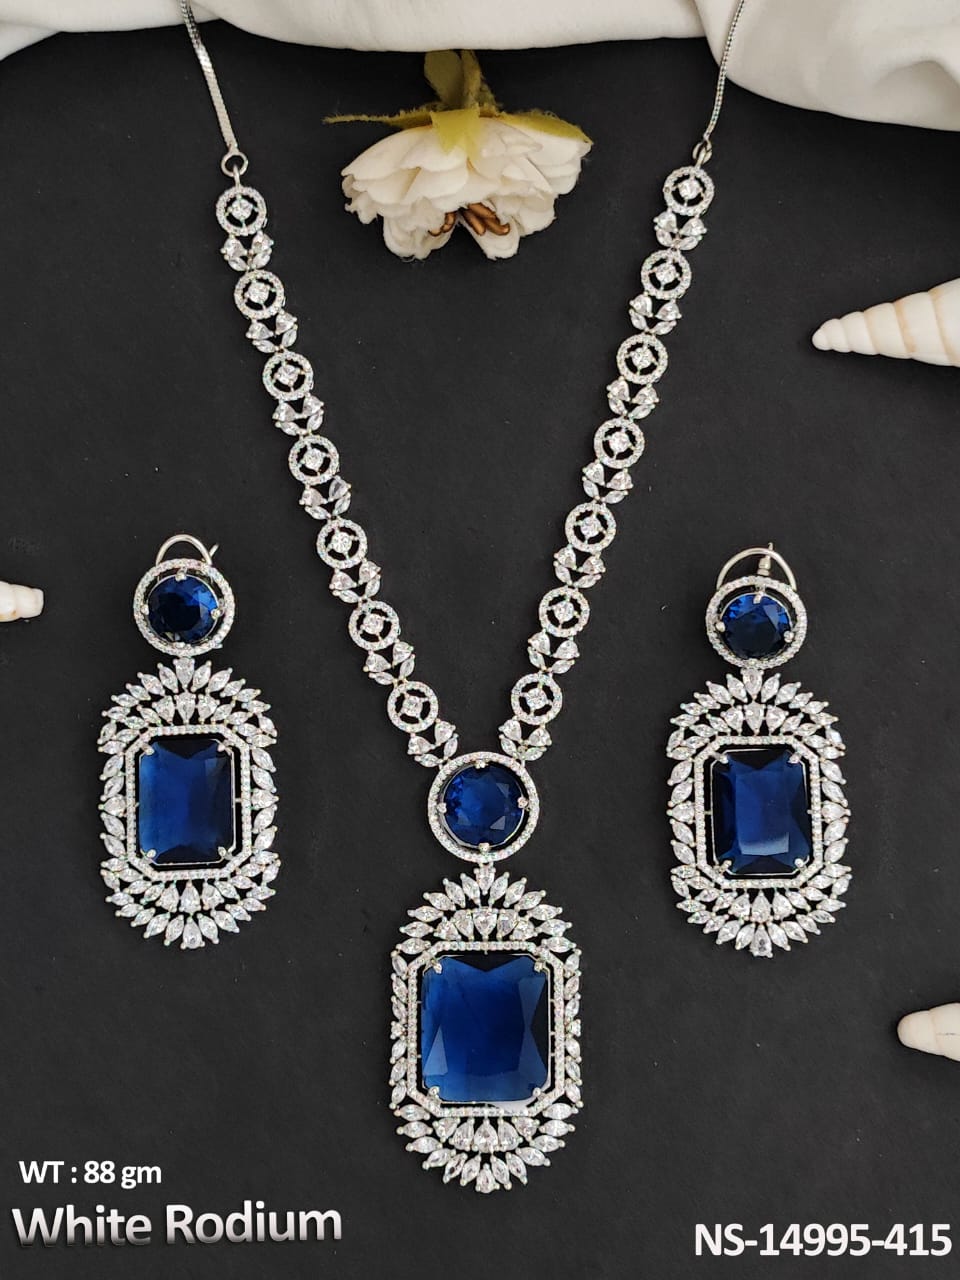 This stunning CZ AD Full Stone Designer Necklace Set is the perfect accessory for any party or special event